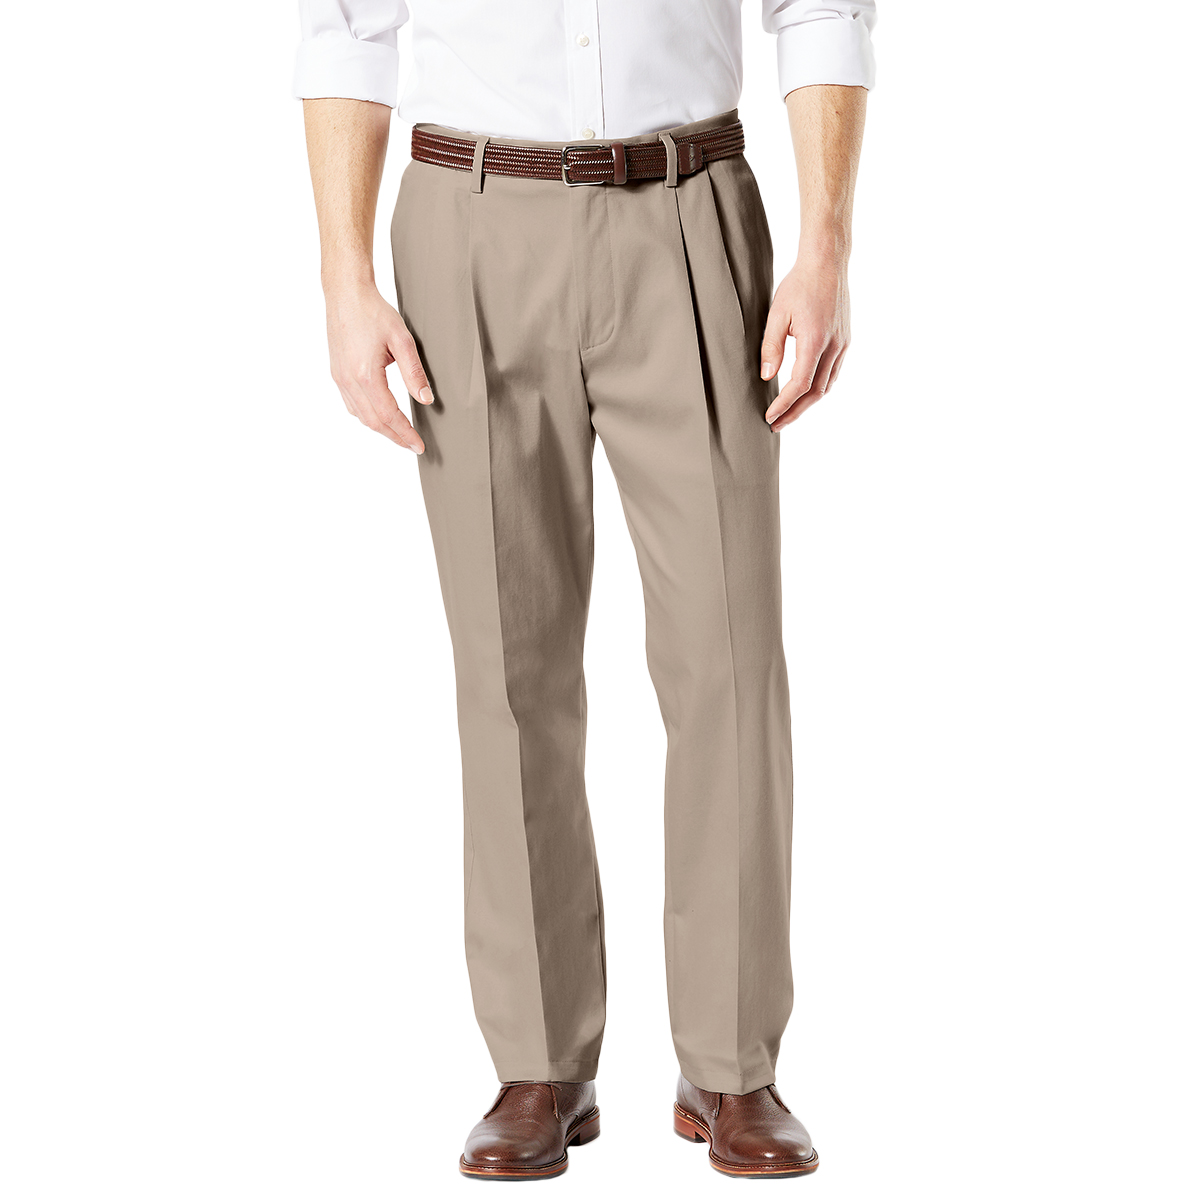 Dockers Men's Classic Fit Signature Khaki 2.0 Stretch Pleated Crease Pants - Brown, 40/29